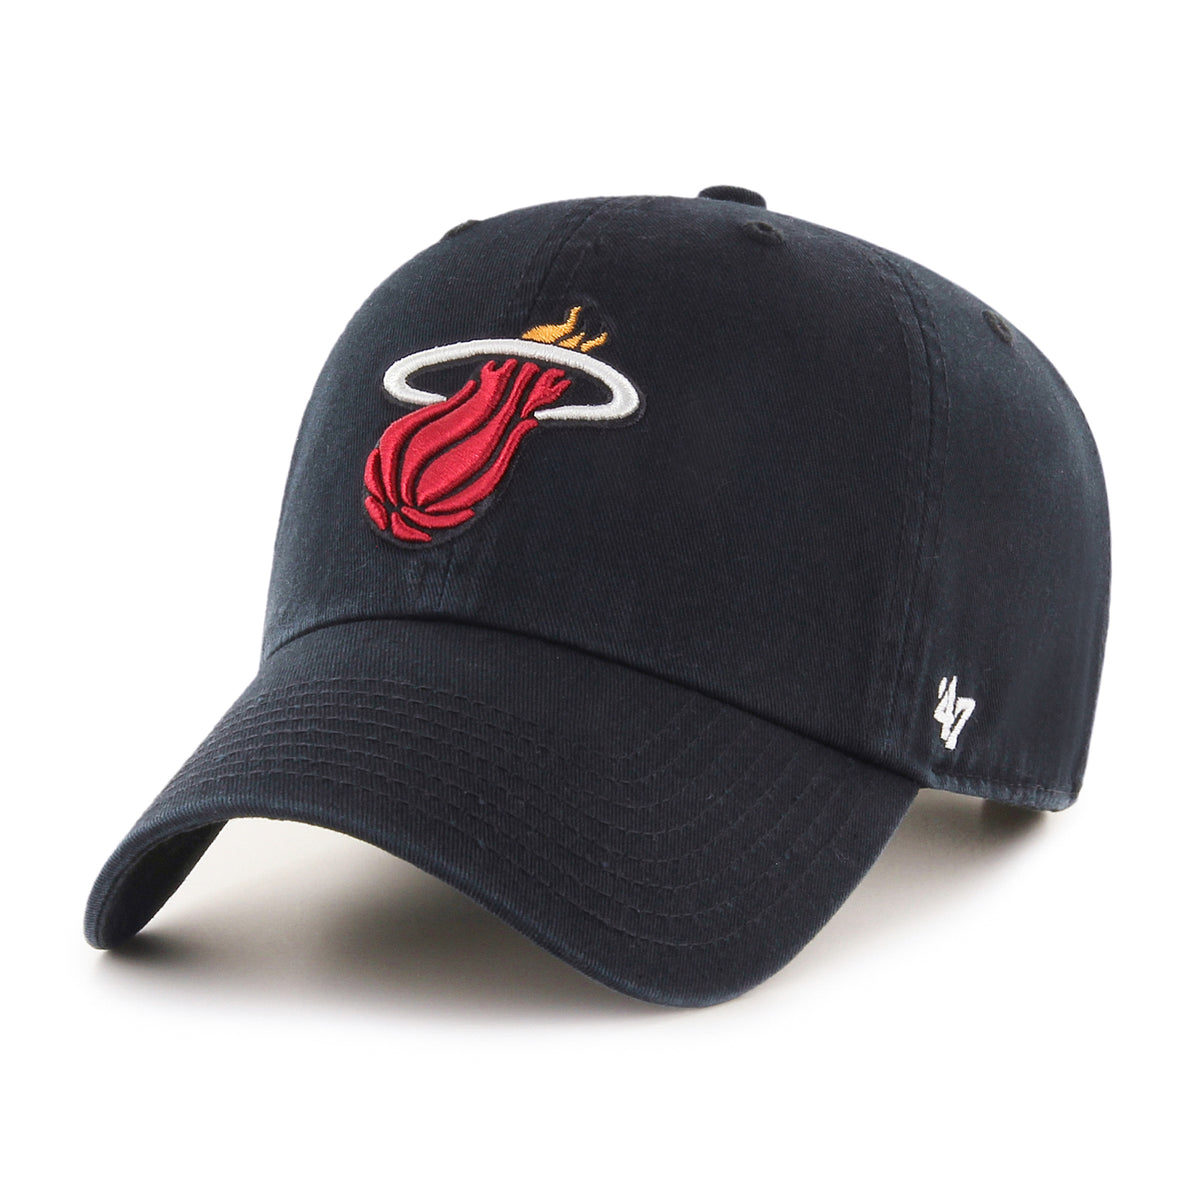 MIAMI HEAT YOUTH '47 CLEAN UP